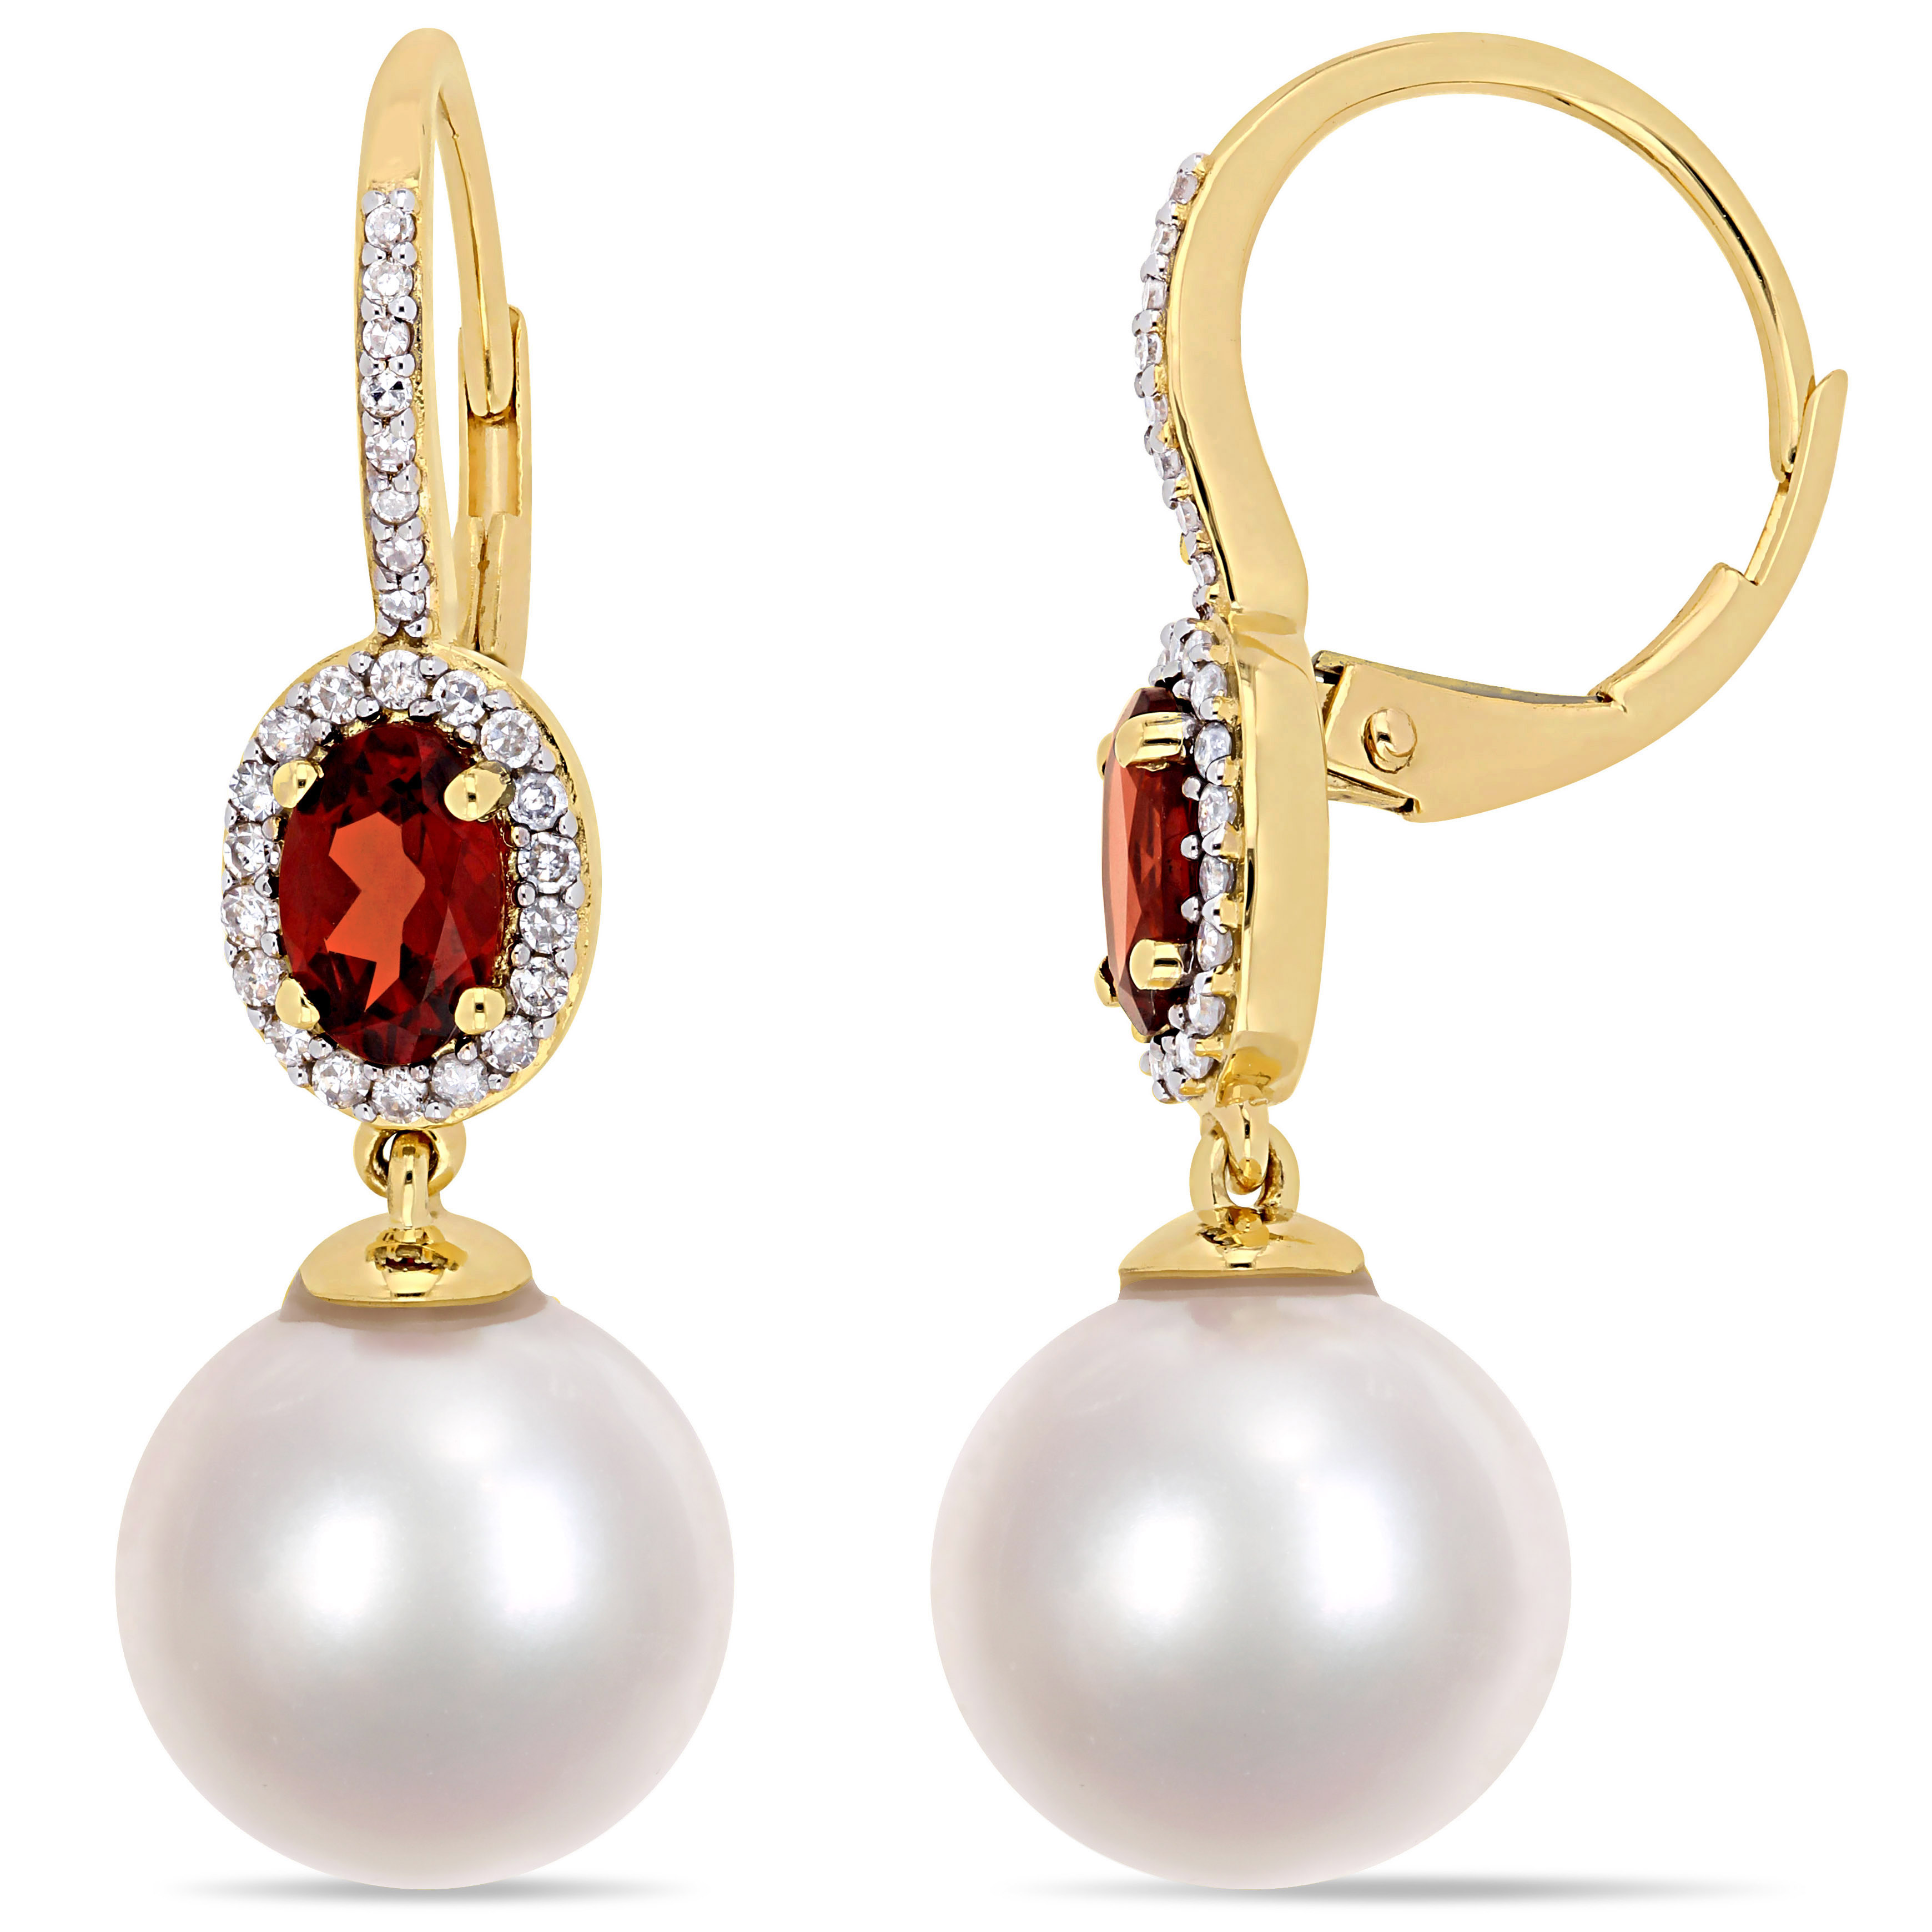 11 - 12 MM Cultured Freshwater Pearl 1 1/10 CT TGW Garnet and 1/4 CT TW Diamond Oval Drop Leverback Earrings in 10k Yellow Gold